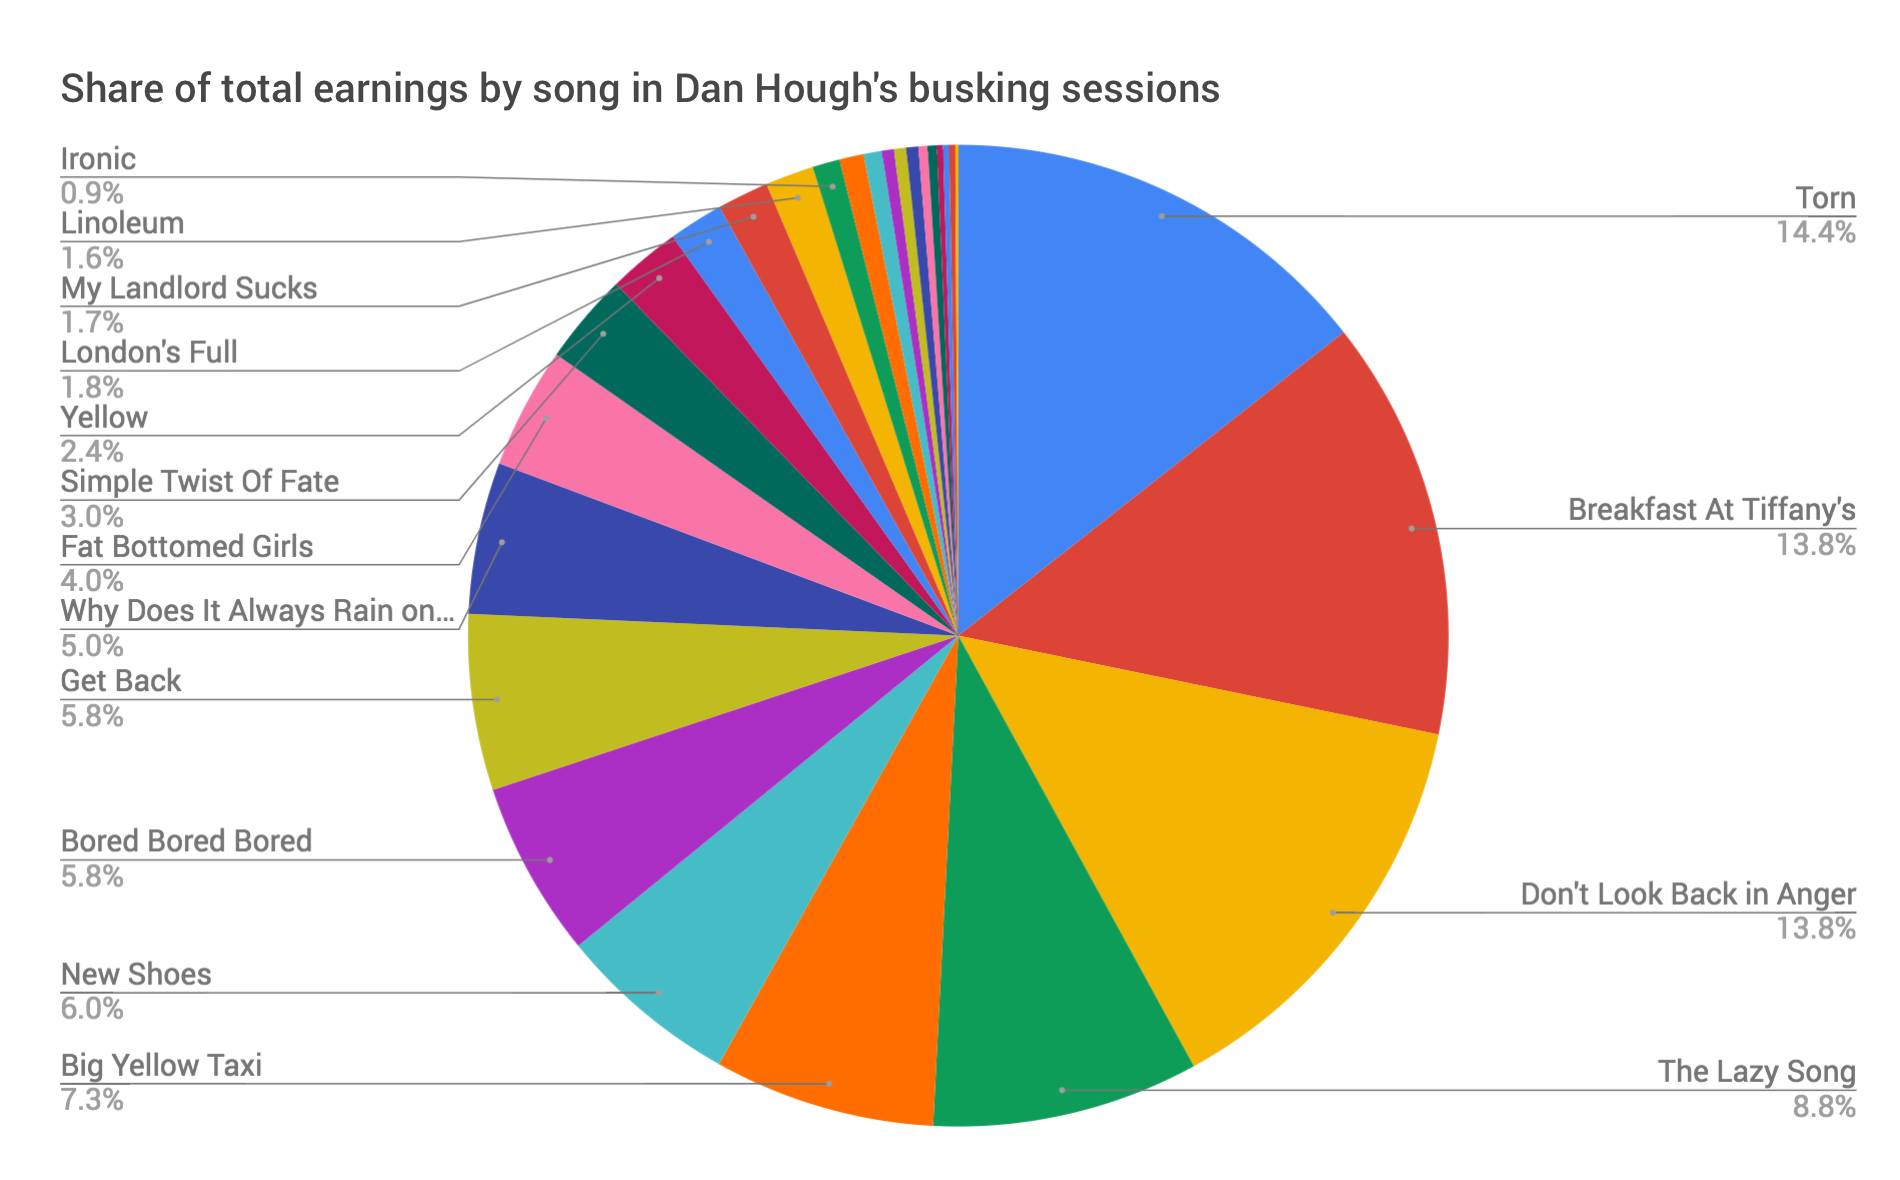 All this data is heavily influenced by which songs I enjoy playing, as well as how popular a song is.